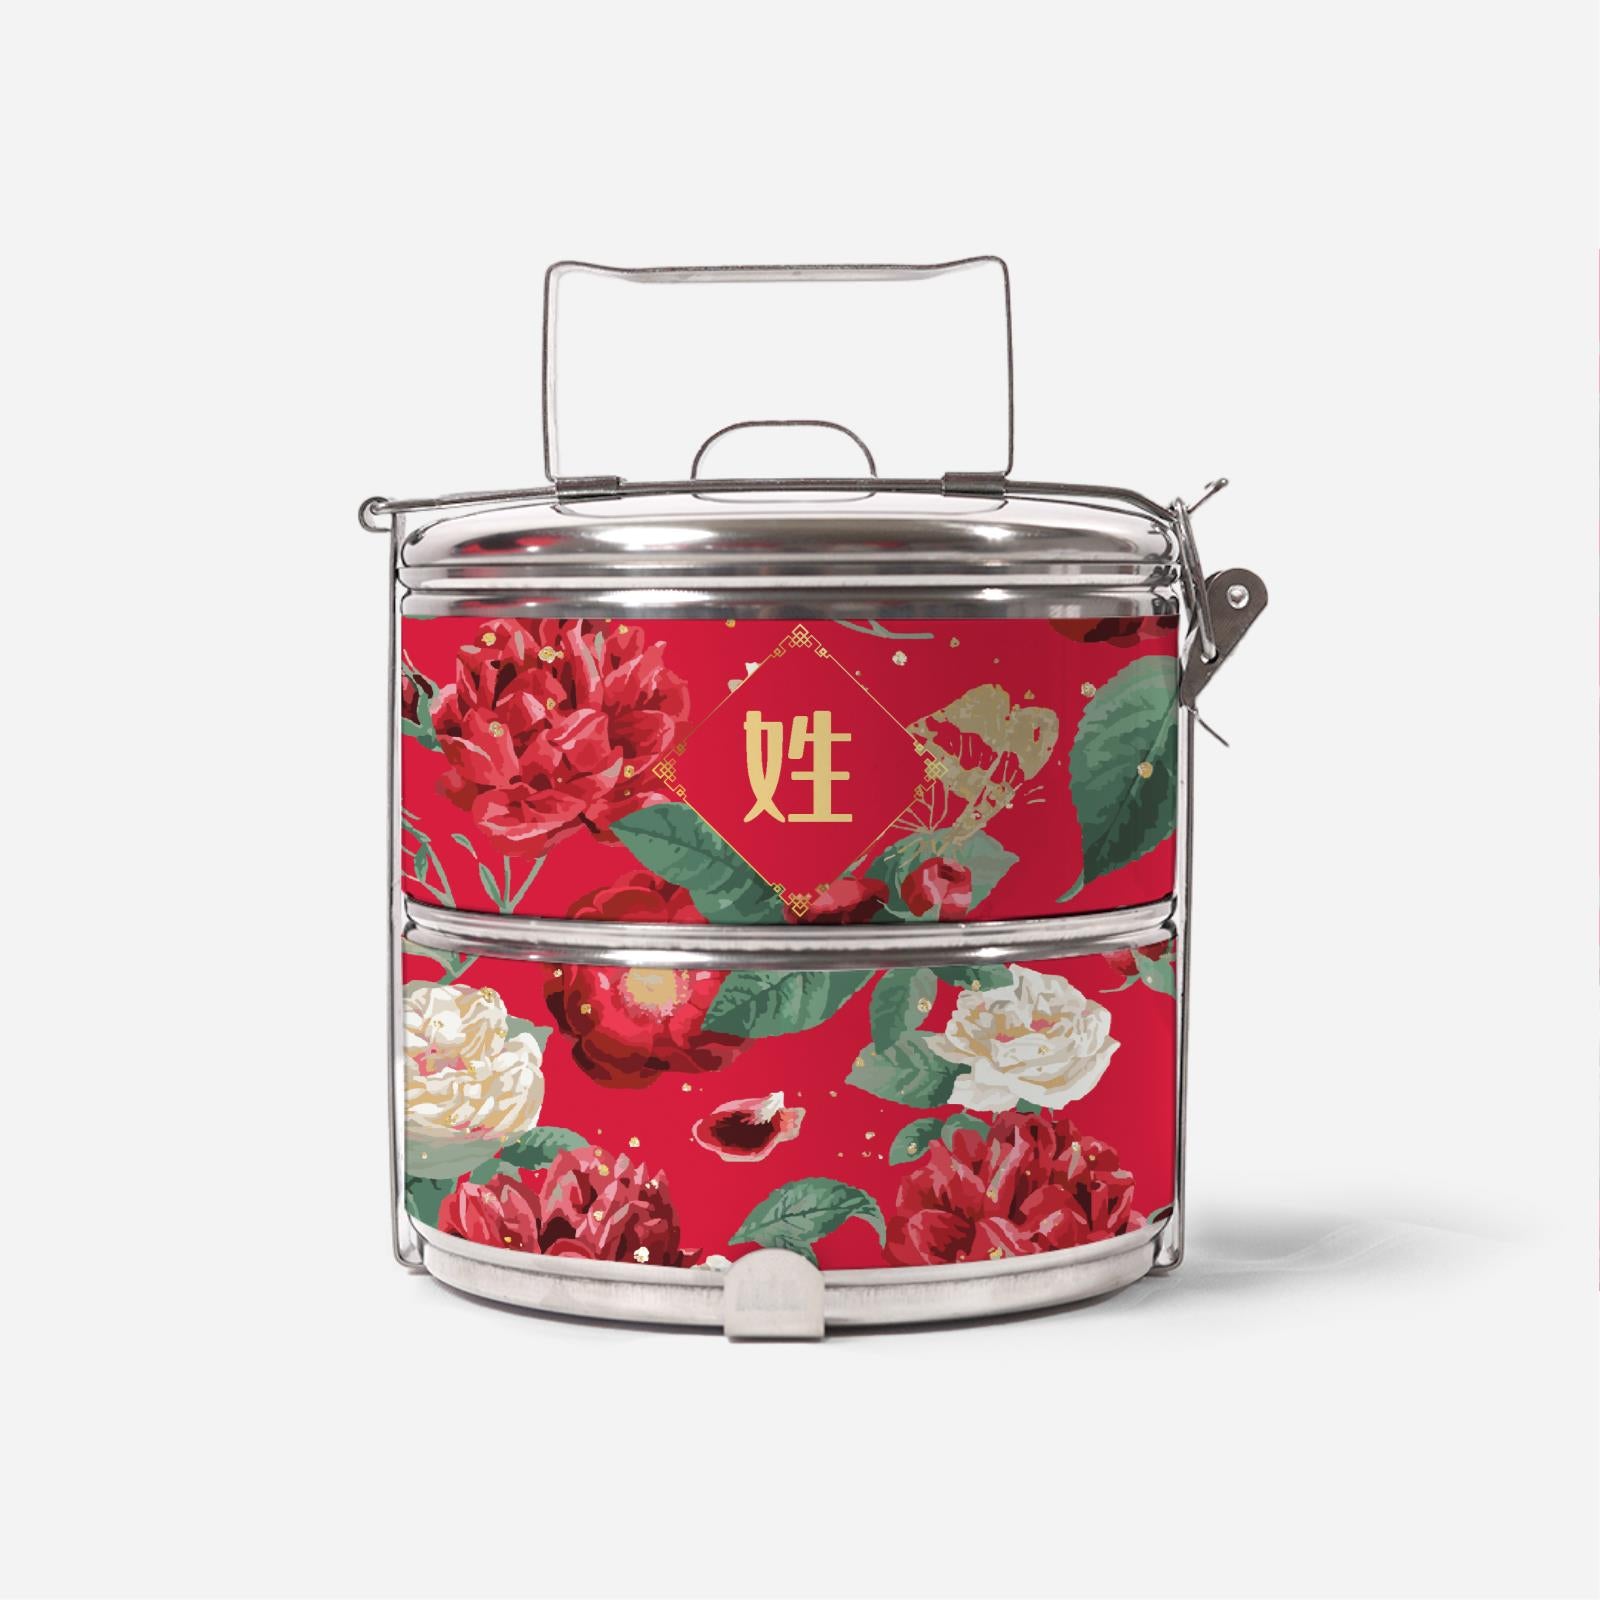 Royal Floral Series With Chinese Surname Two Tier Standard Tiffin Carrier - Scorching Passion